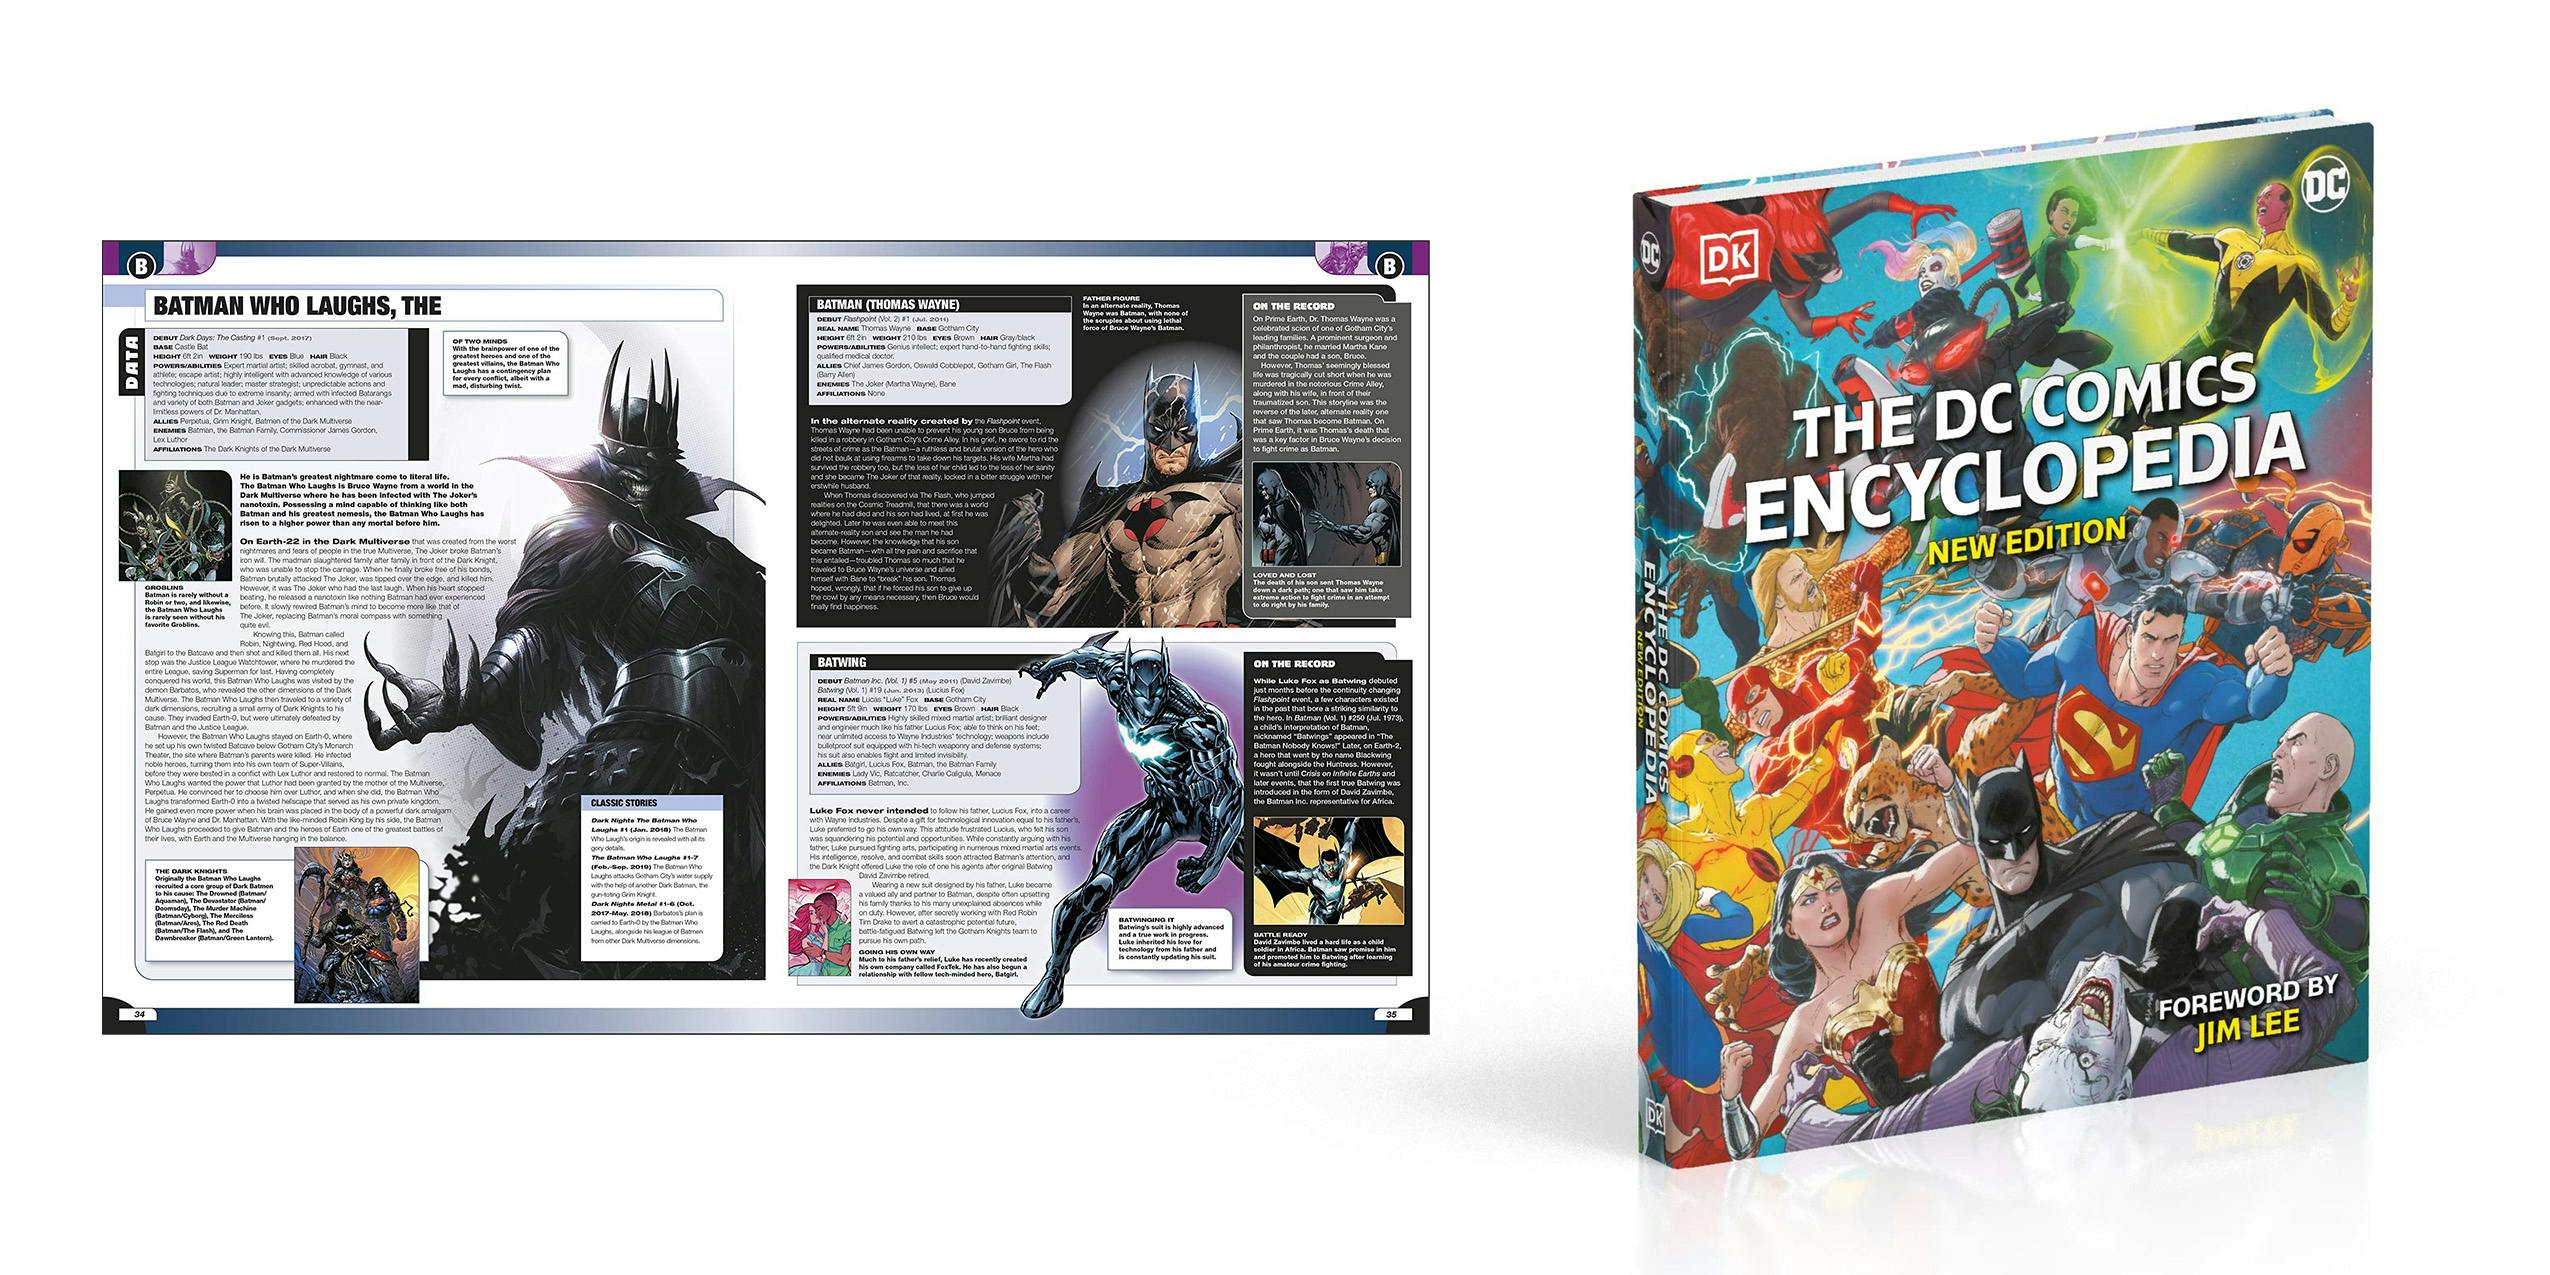 The DC Comics Encyclopedia open and closed.